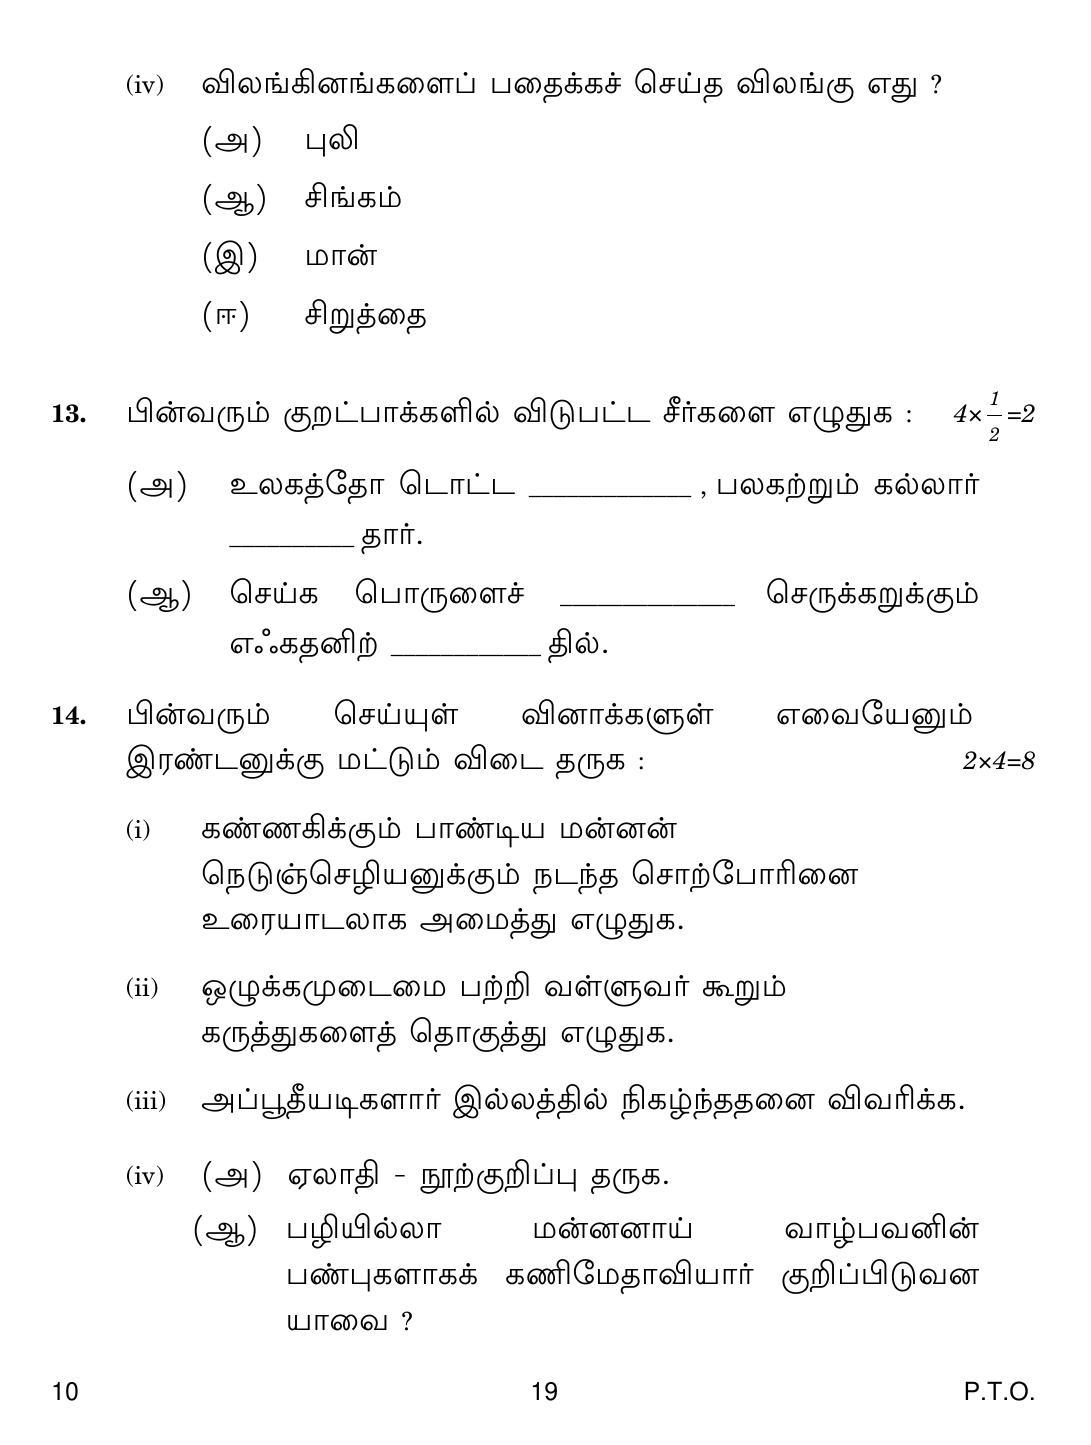 CBSE Class 10 10 Tamil 2019 Question Paper - Page 19